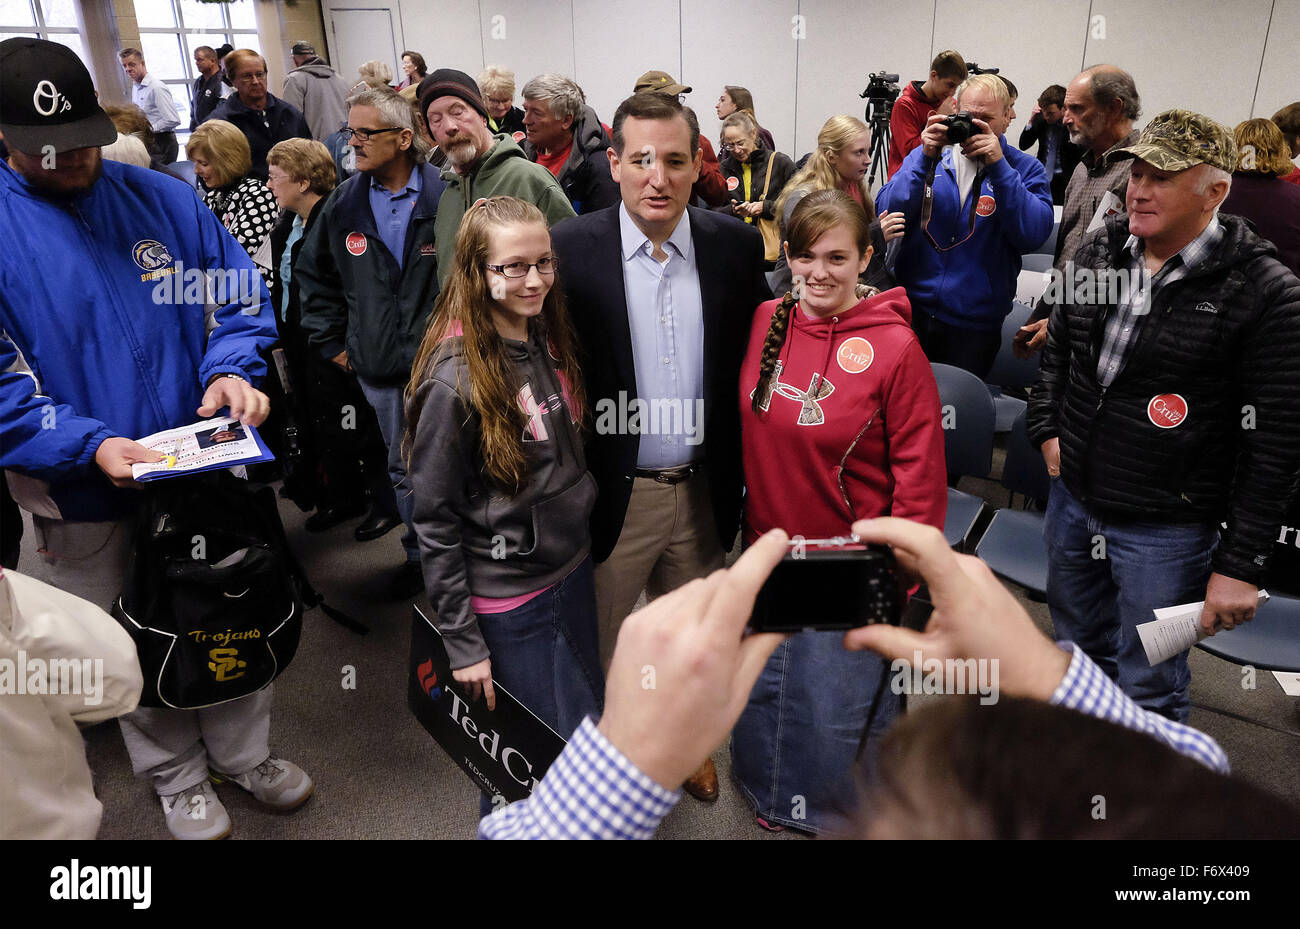 Sioux City, IOWA, USA. 20th Nov, 2015. U.S. Sen. TED CRUZ (R-TX) poses with attendees during a campaign stop in Sioux City, Iowa Friday, November 20, 2015, at Briar Cliff University, a private Catholic school. Cruz said when Pres. Obama insults him, he is also insulting the American people like those attending his town hall meeting. © Jerry Mennenga/ZUMA Wire/Alamy Live News Stock Photo